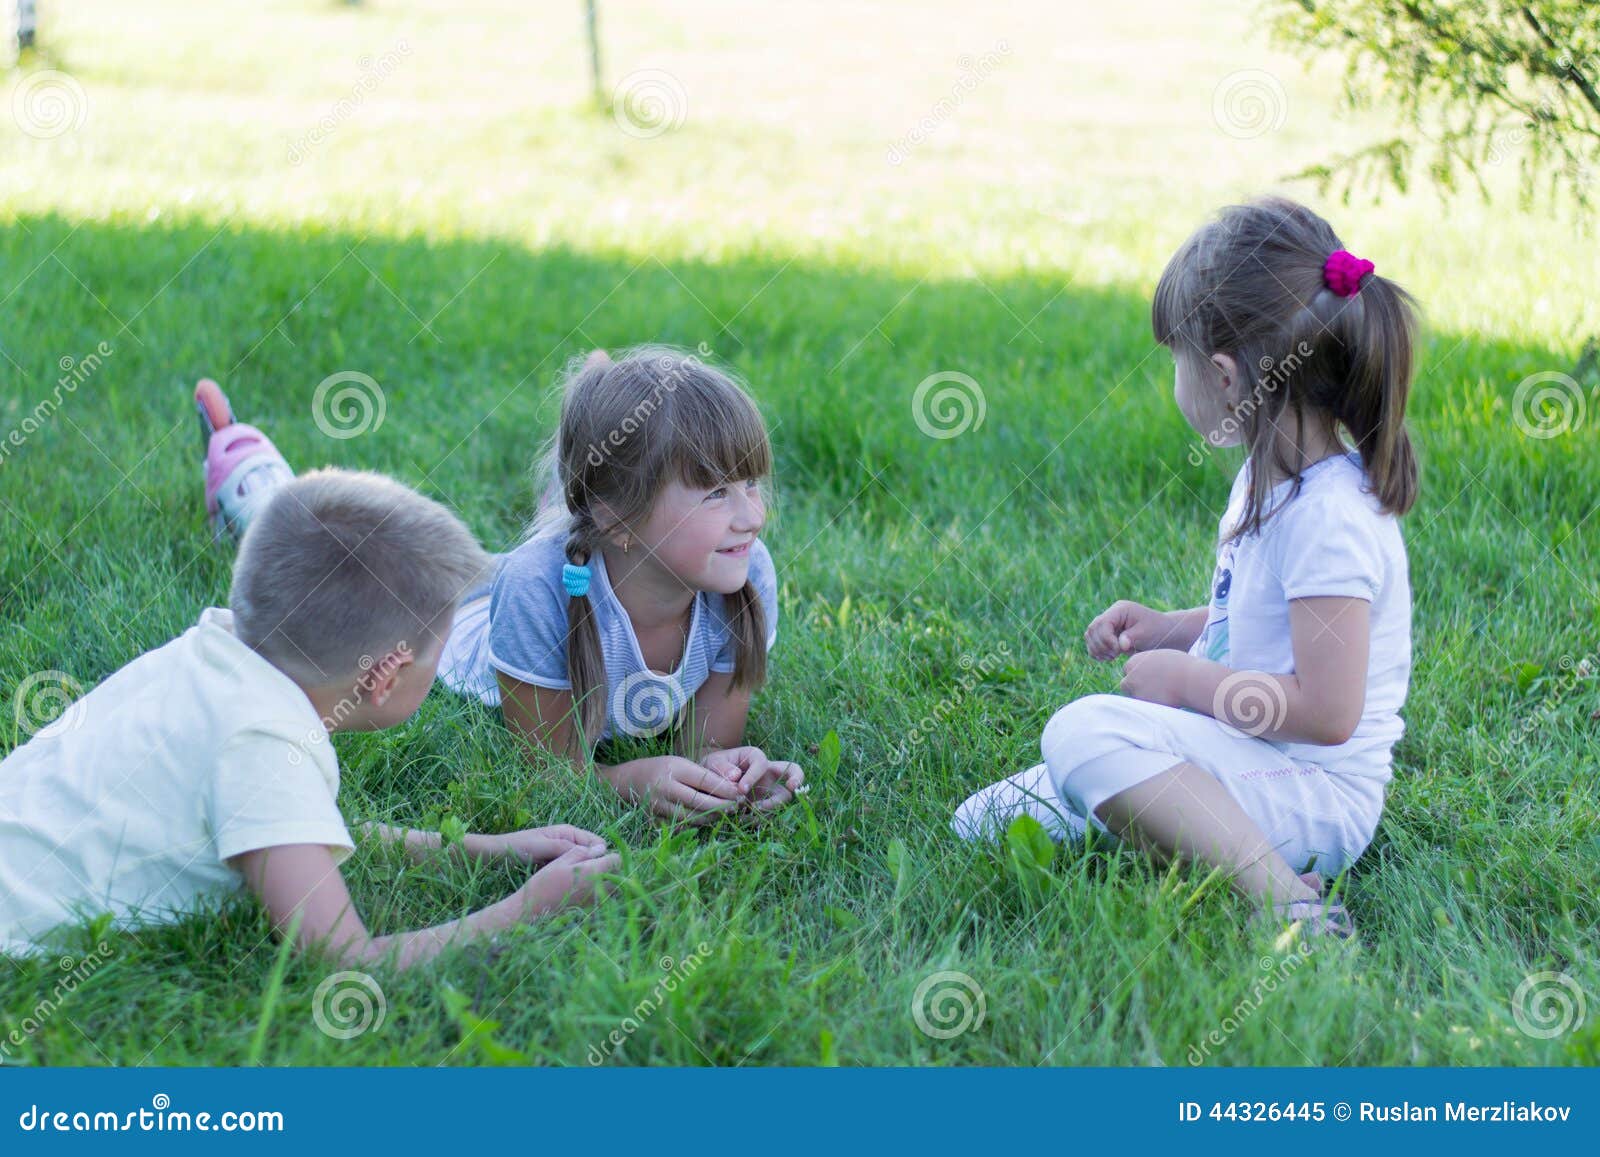 Children Playing on the Grass Stock Image - Image of friendship, family